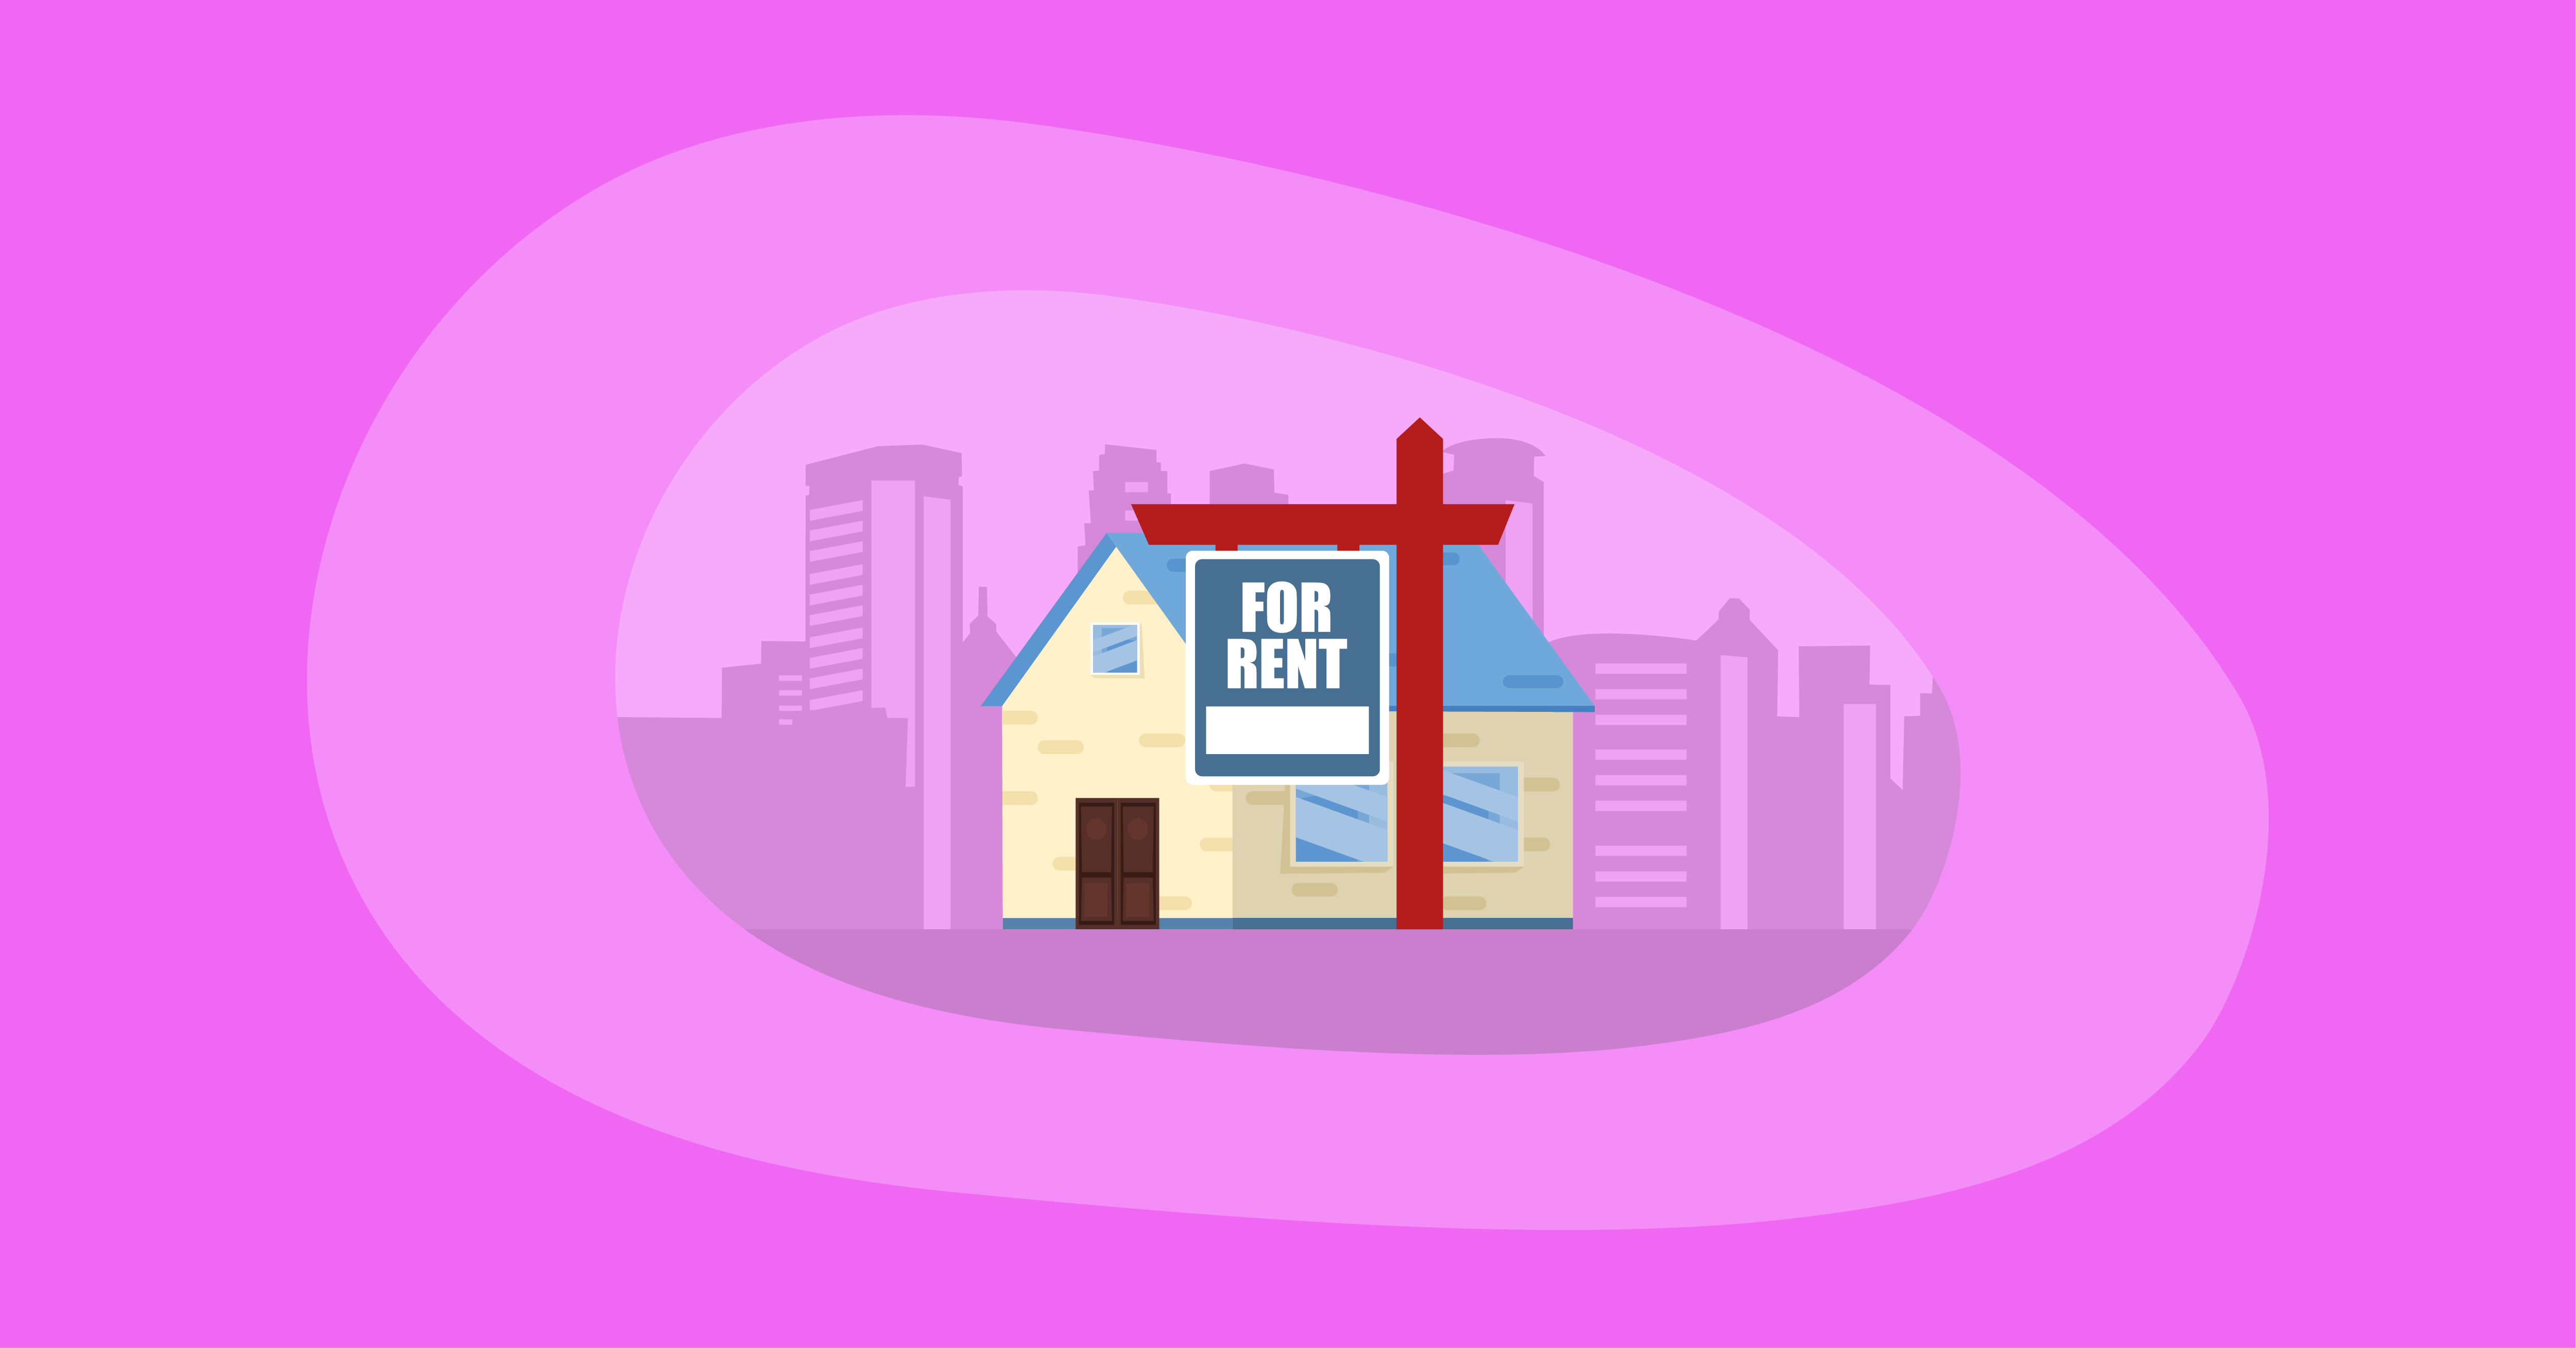 Illustration of a house for rent